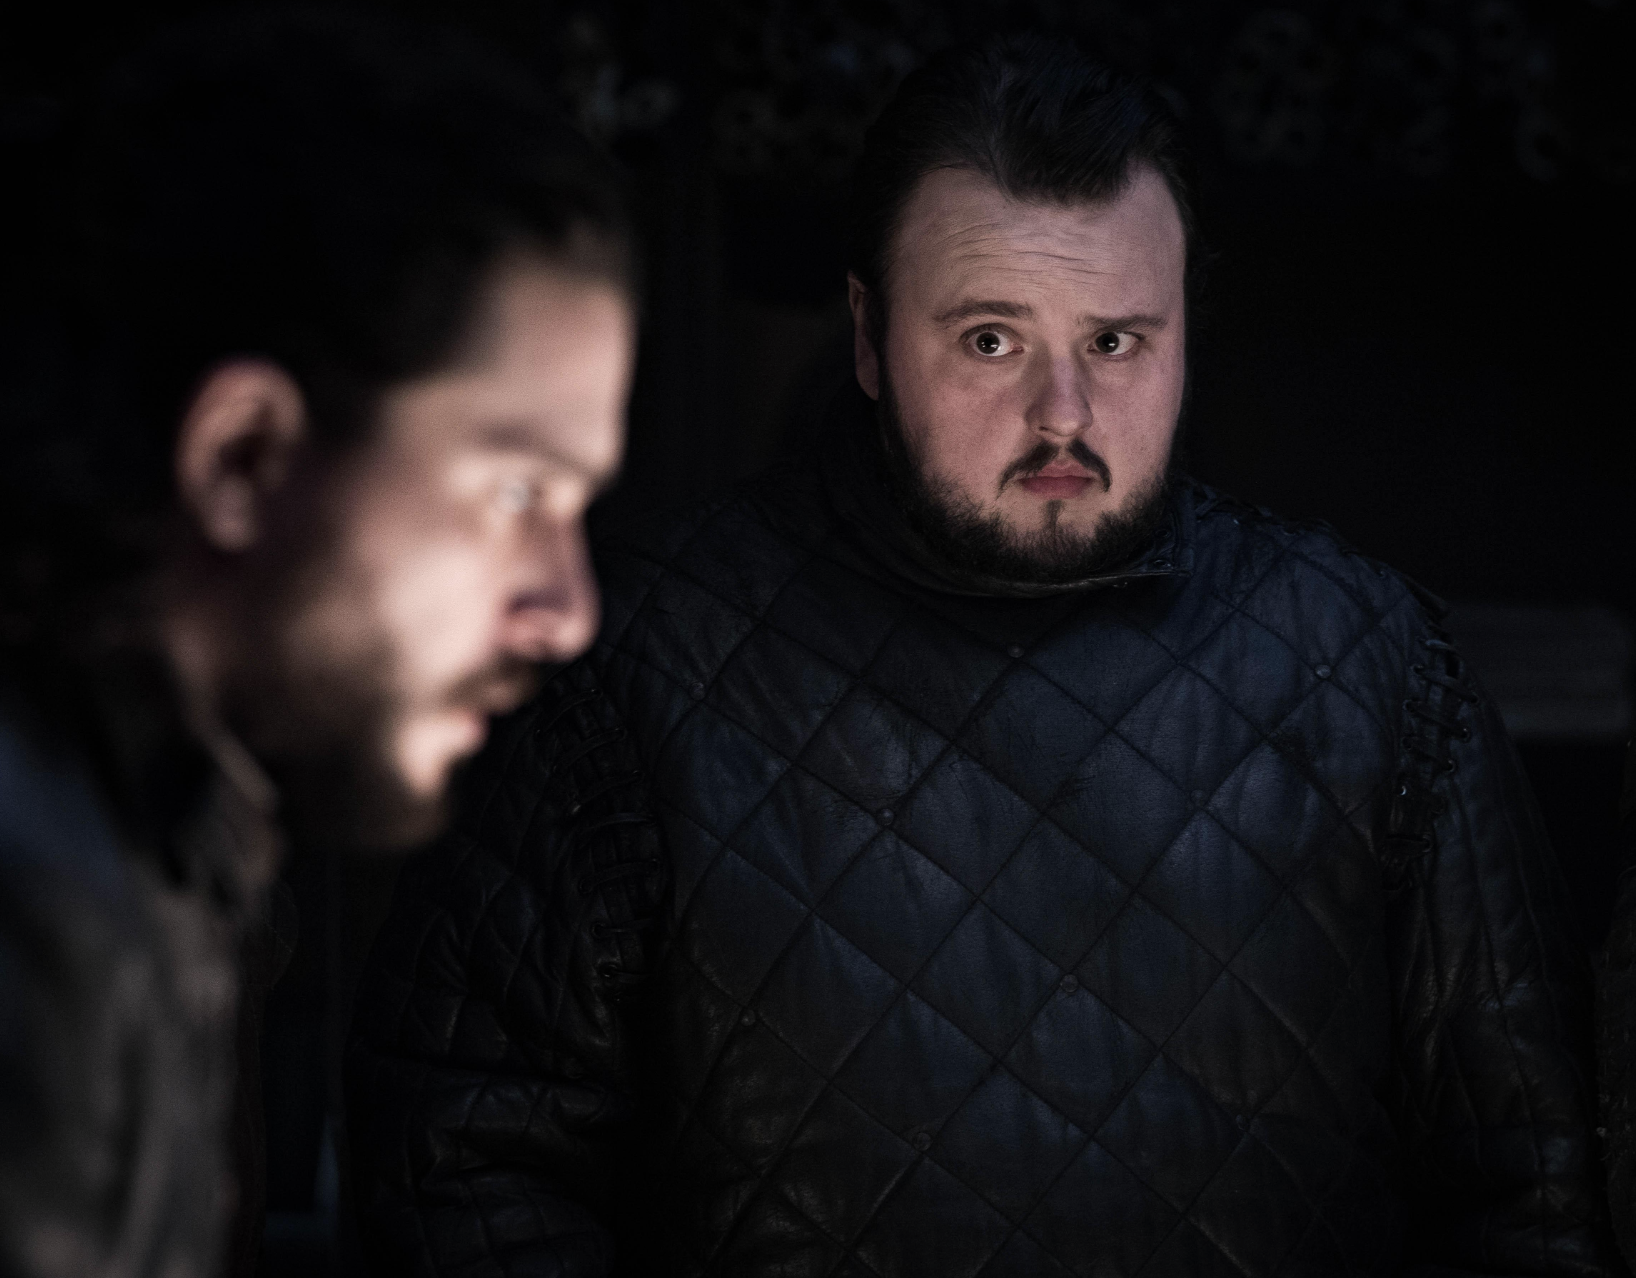 Which Game Of Thrones Character Are You? Samwell Tarly